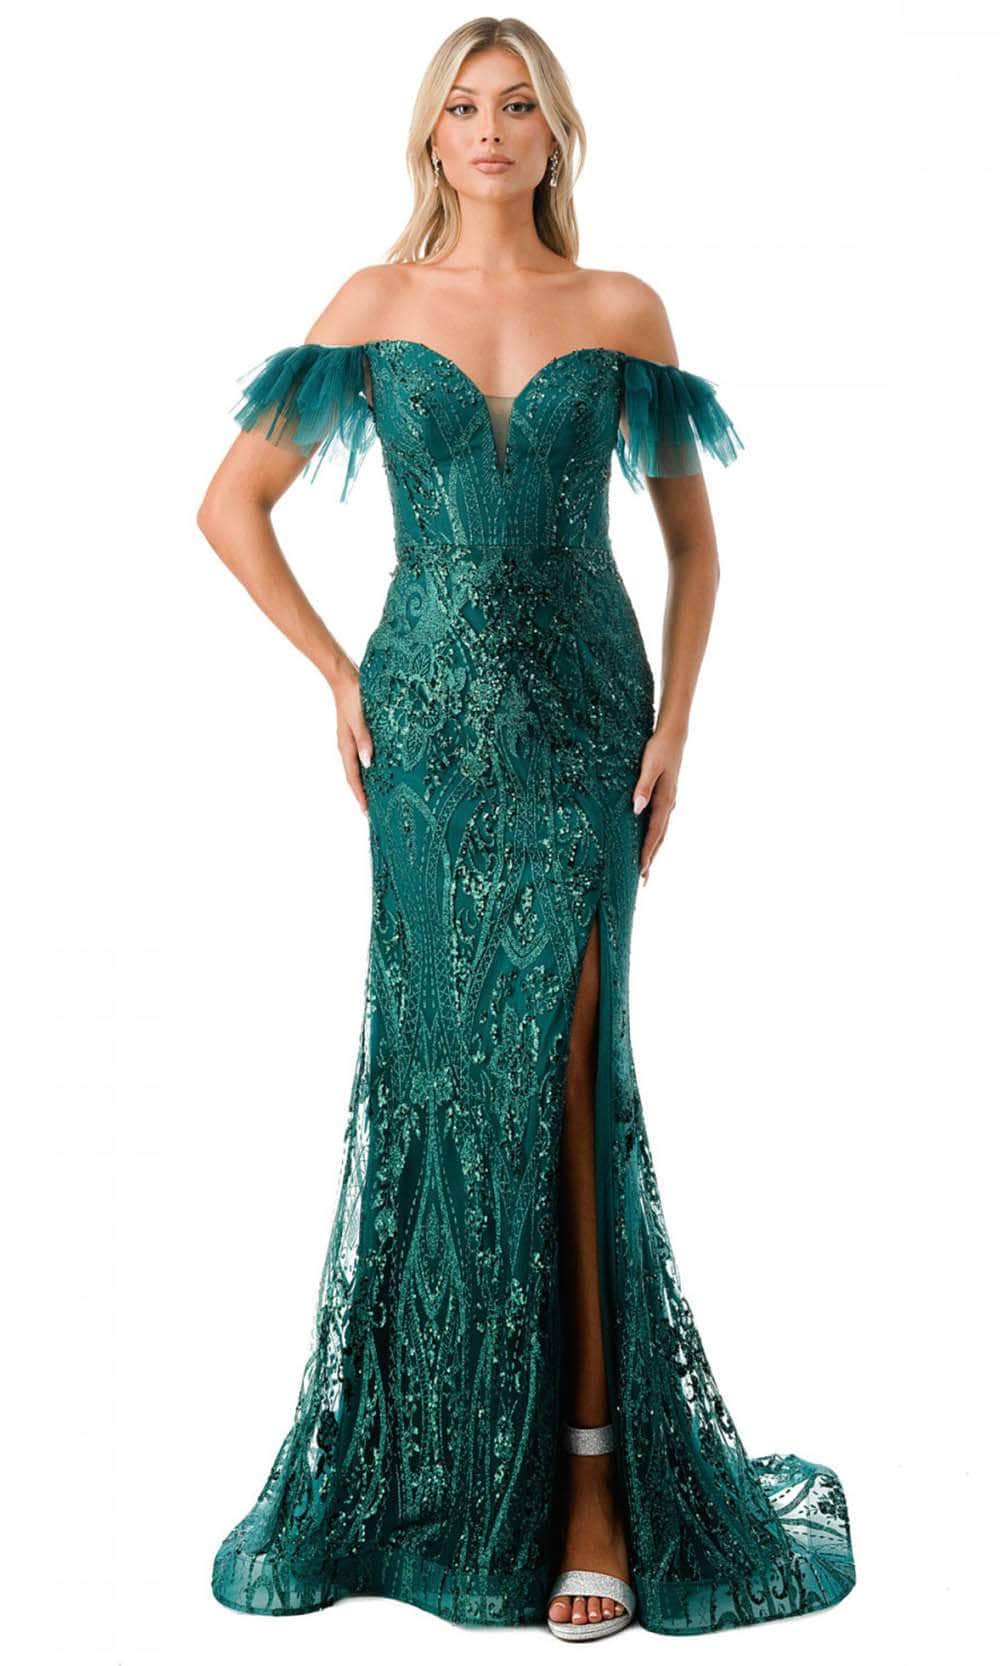 Image of Aspeed Design L2786F - Ruffled Sleeve Embellished Evening Gown